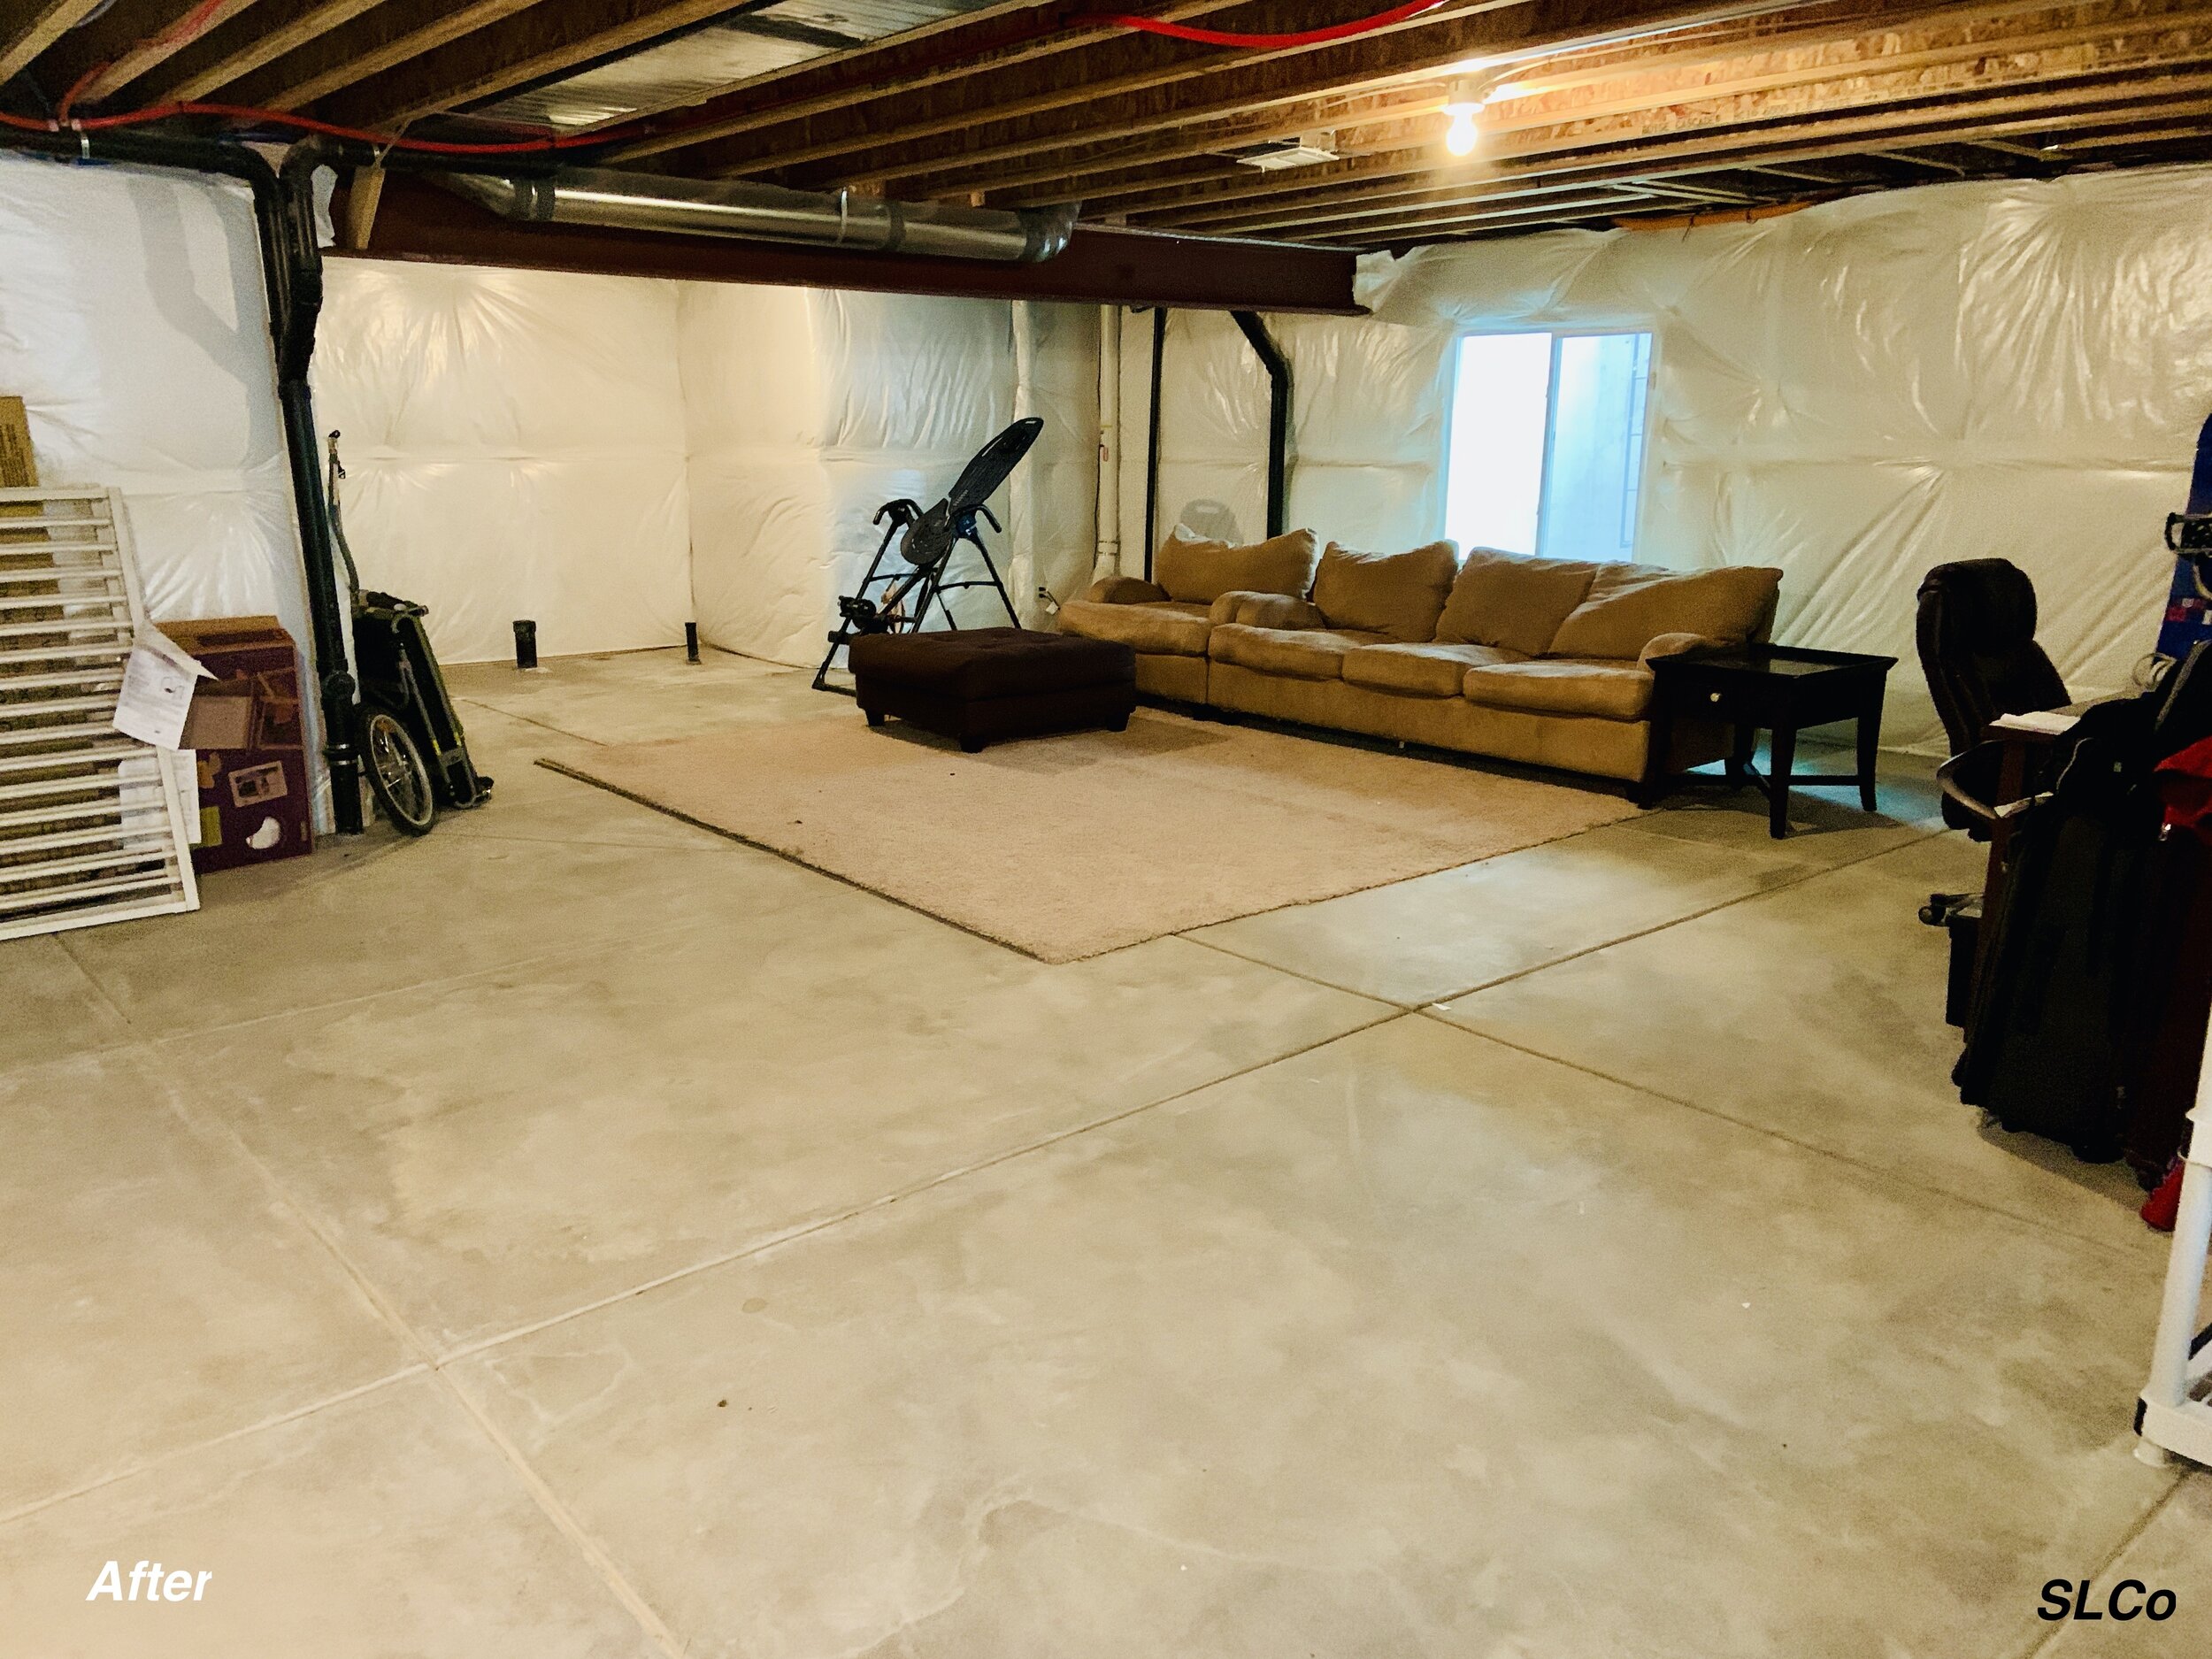 After photo of unfinished basement with a carpet in front of a couch and clear floor